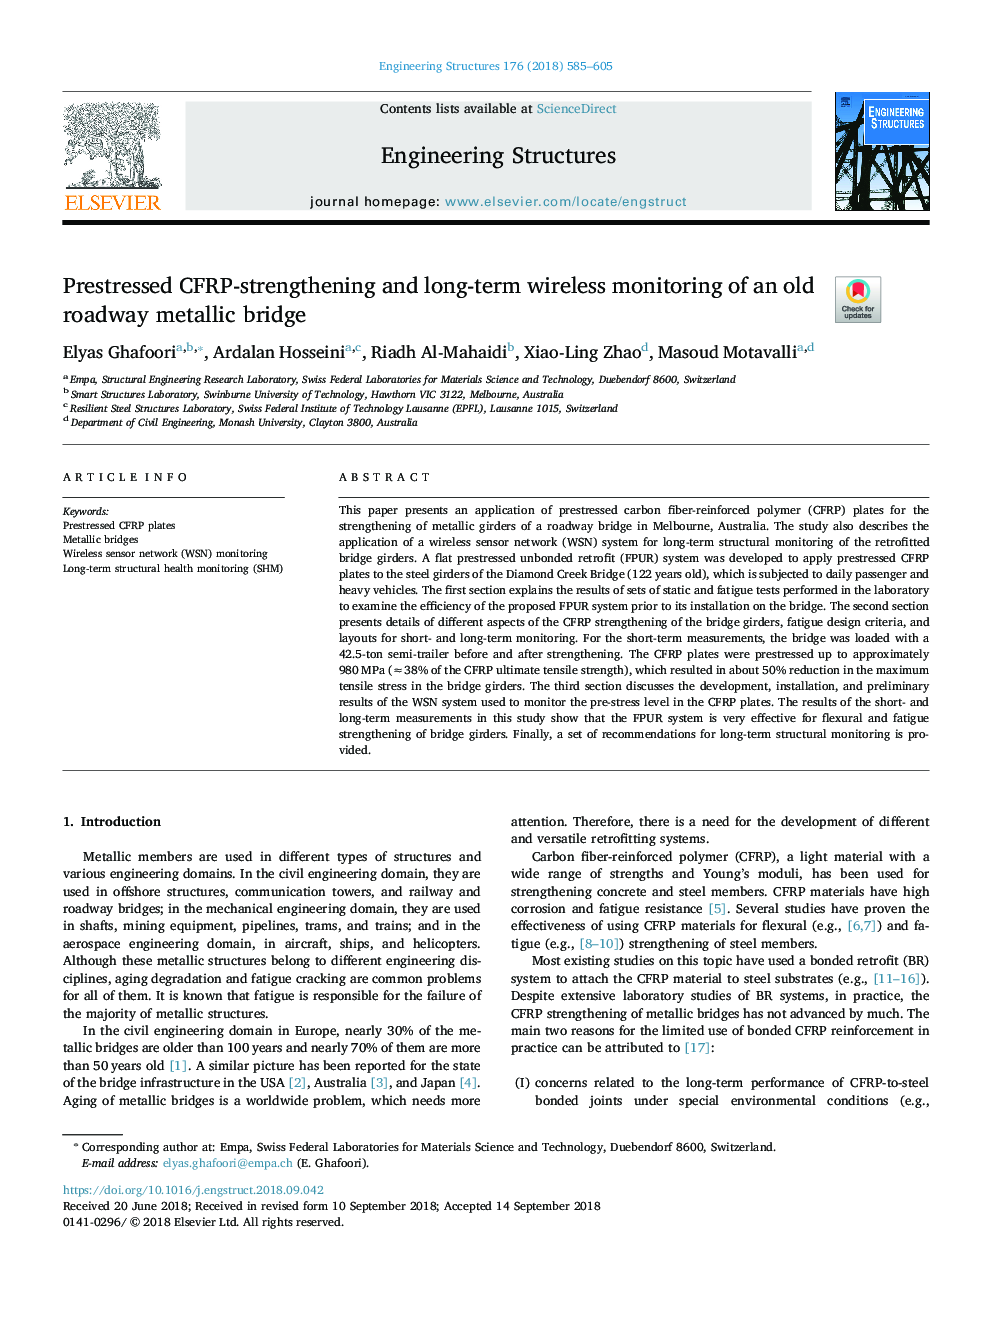 Prestressed CFRP-strengthening and long-term wireless monitoring of an old roadway metallic bridge